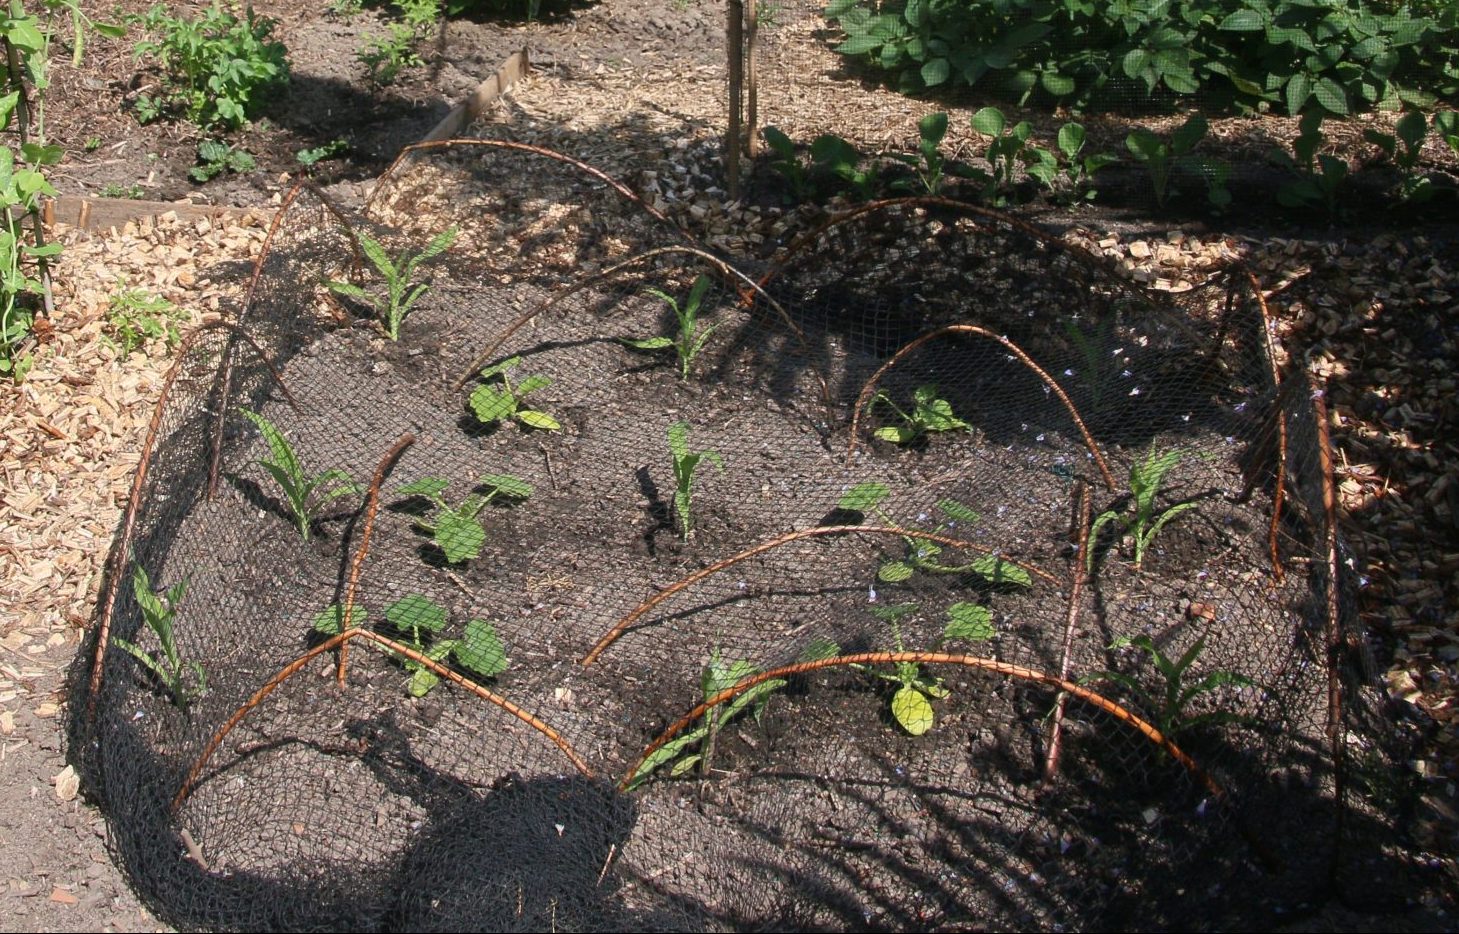 Young courgette and sweetcorn plants, planted together